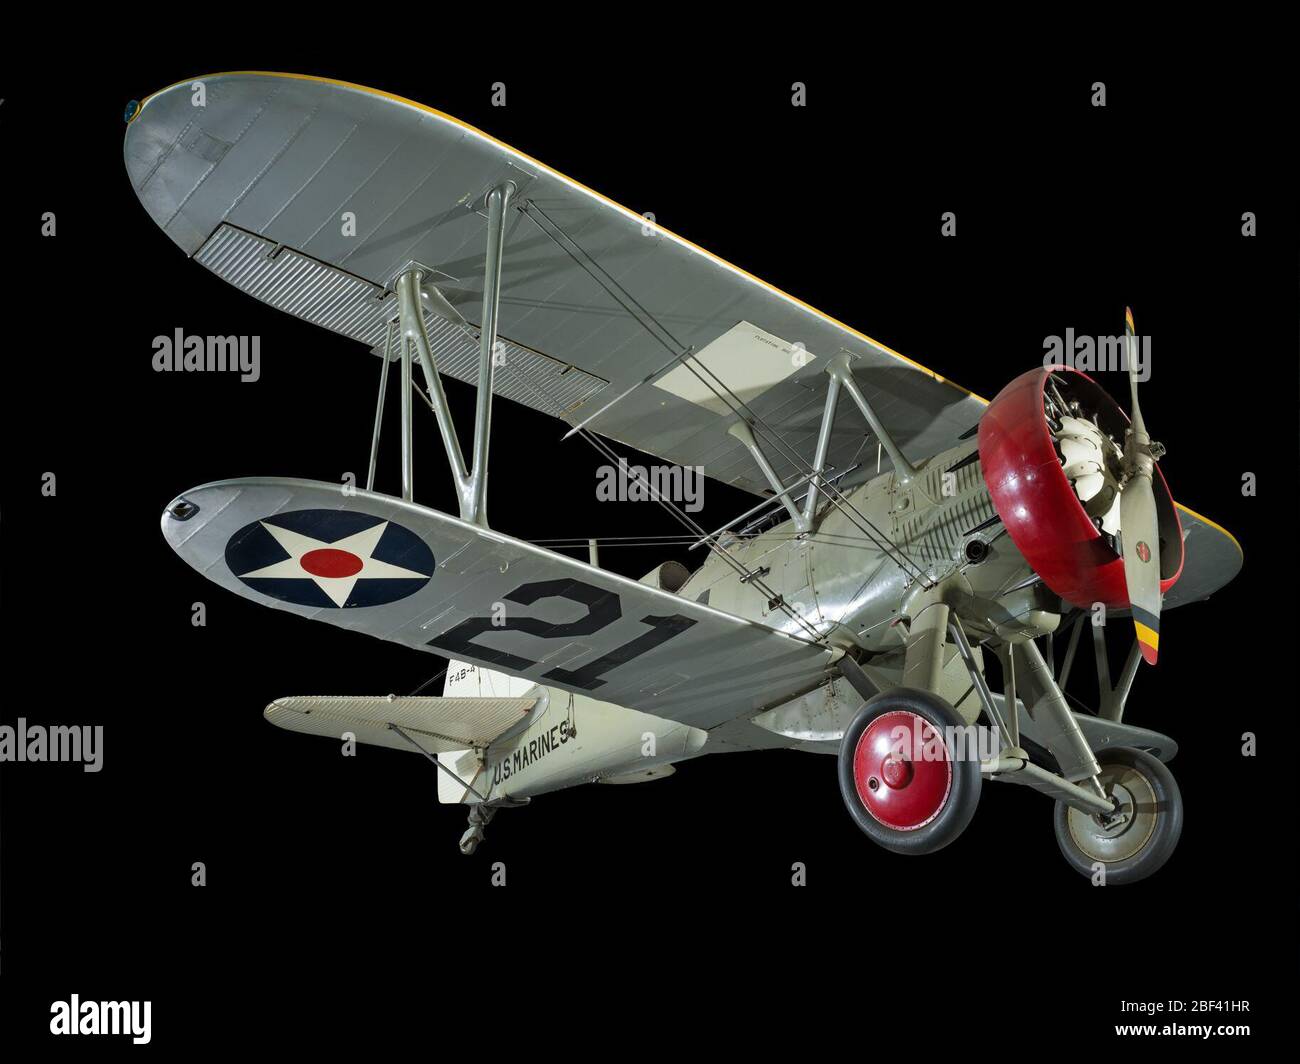 Boeing F4B4. Wing Span 914 cm (360 in.), Length 612 cm (241 in.), Height 285 cm (112 in.), Weight 1,070 kg (2,354 lb)The Boeing F4B/P-12 series served as the primary fighter of the U.S. Navy and U.S. Stock Photo